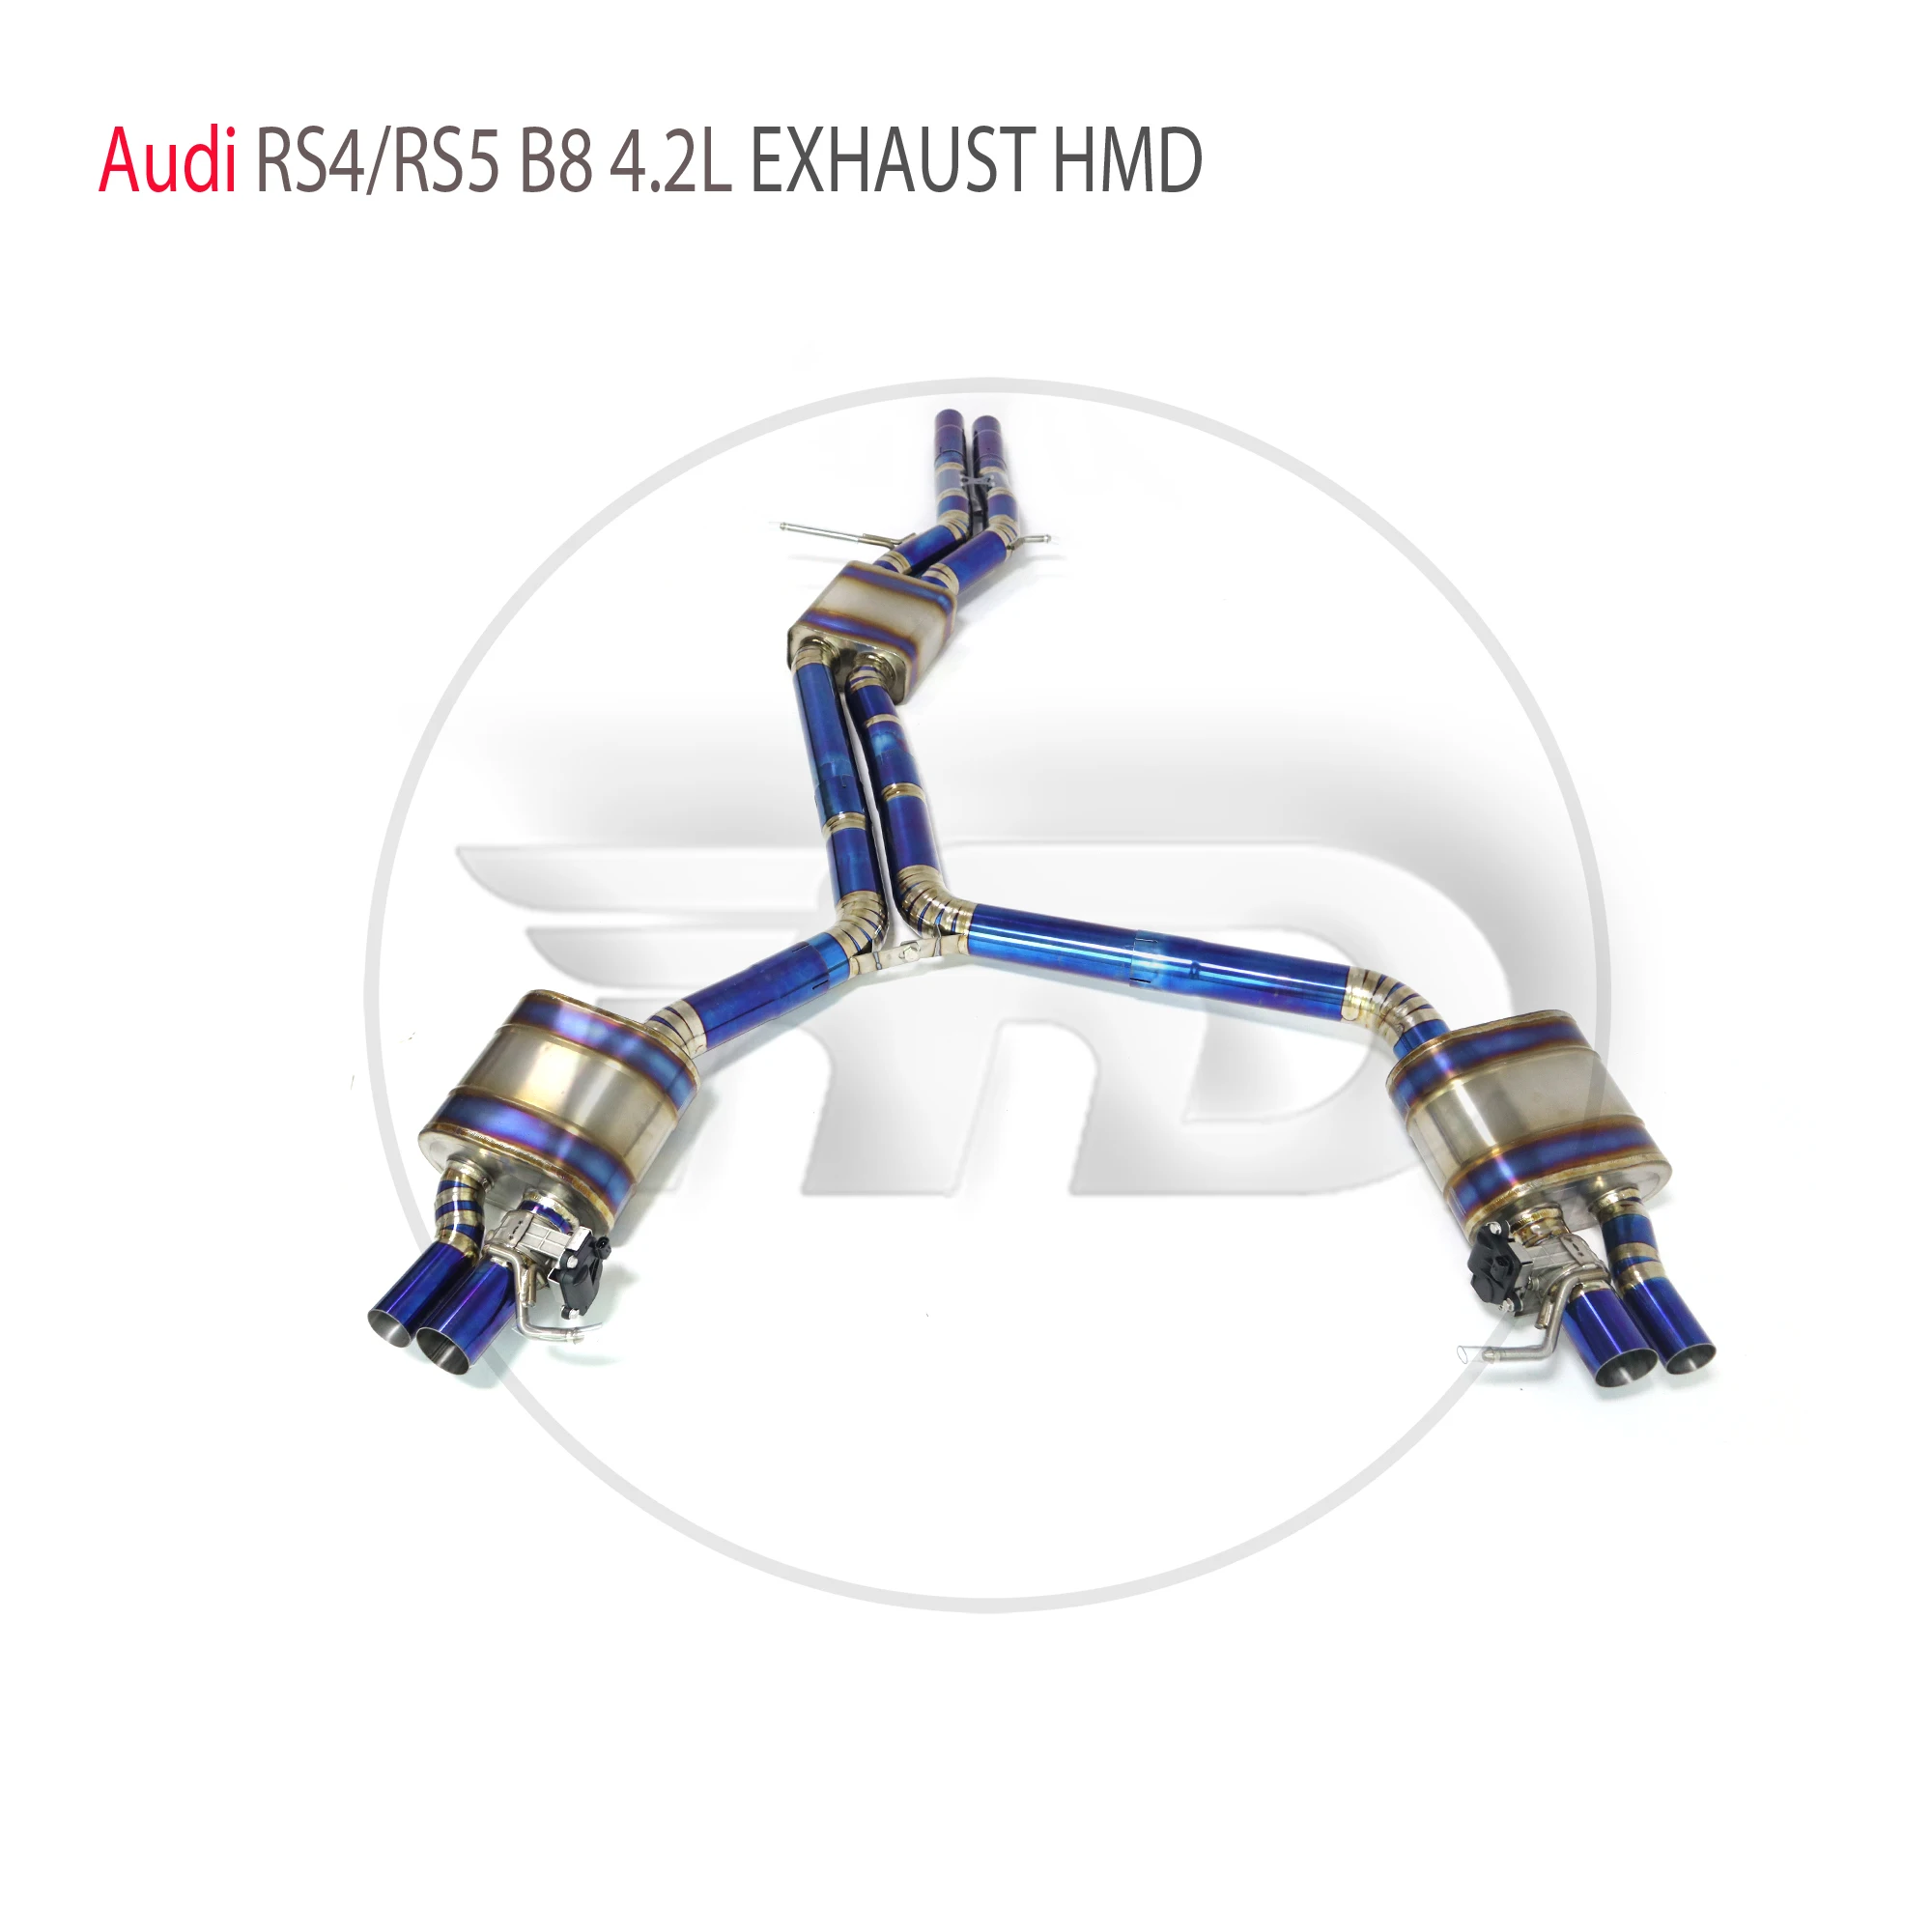 

HMD Titanium Alloy Exhaust System Performance Valve Catback For Audi RS4 RS5 B8 4.2L Car Muffler Racing Pipe